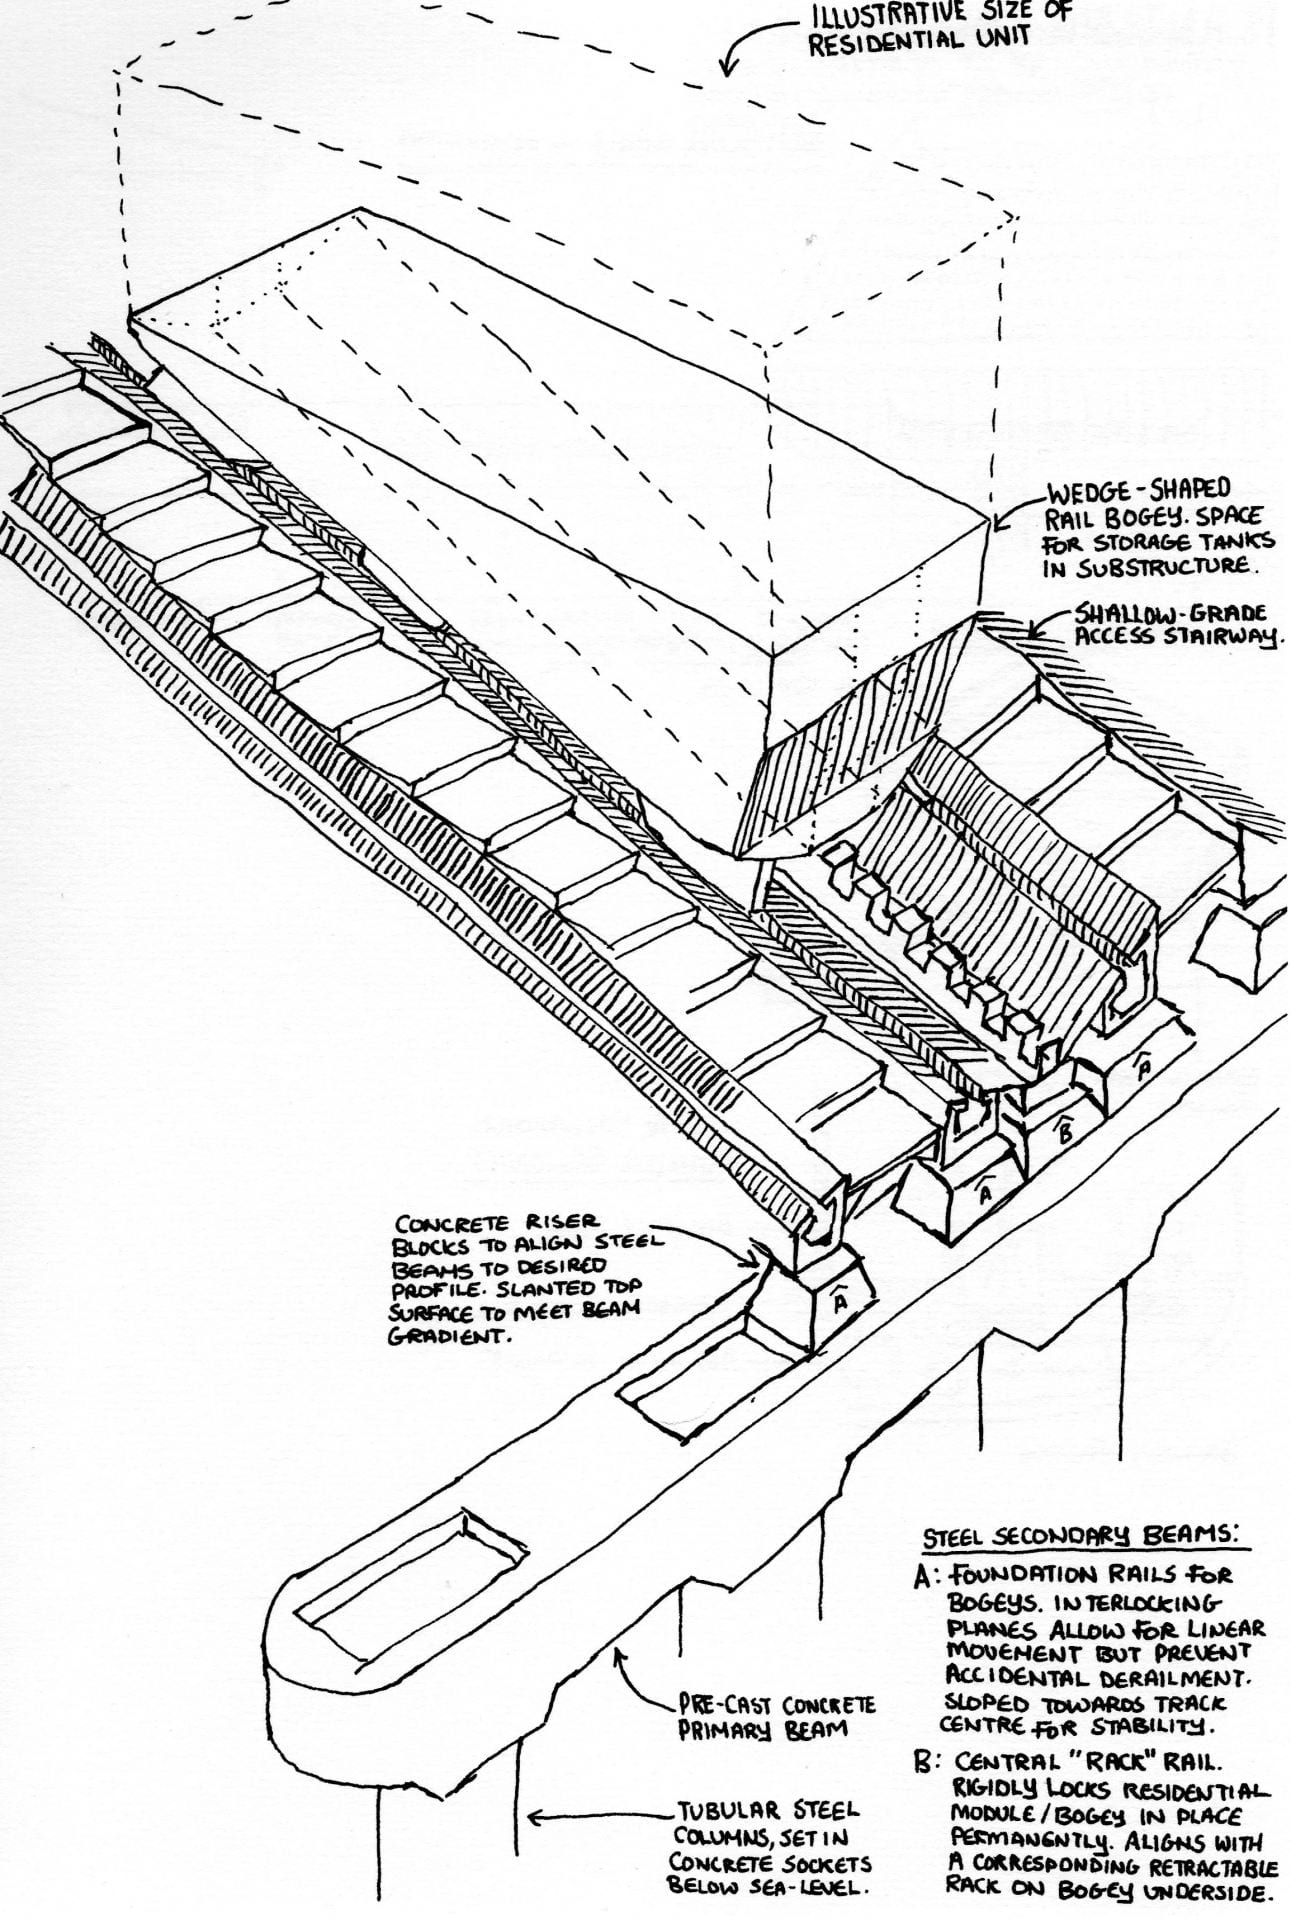 Sloping rail system for retrospectively deliverable and moveable residential units.